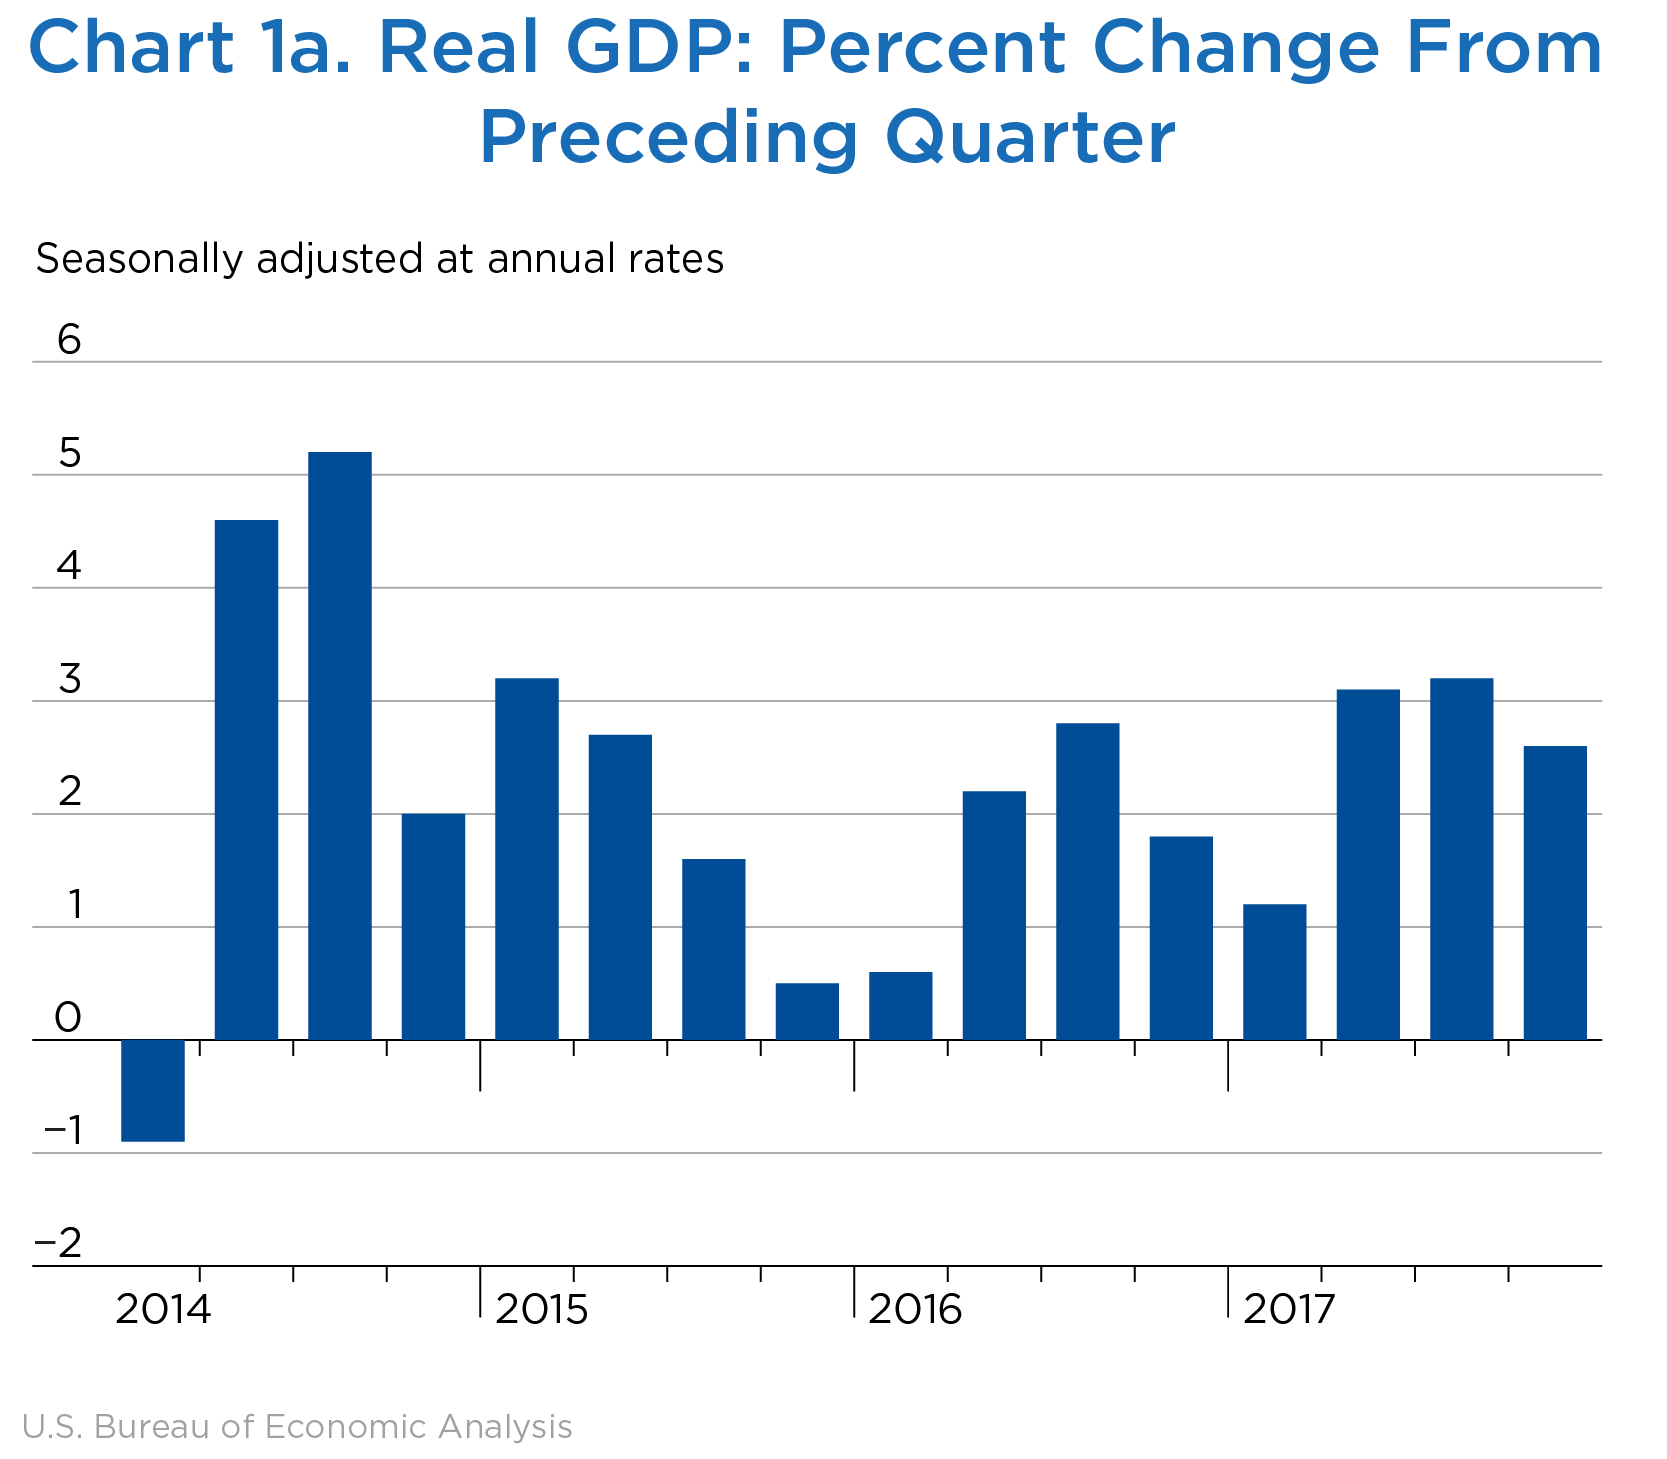 Chart 1a. Real Gross Domestic Product, Bar Chart